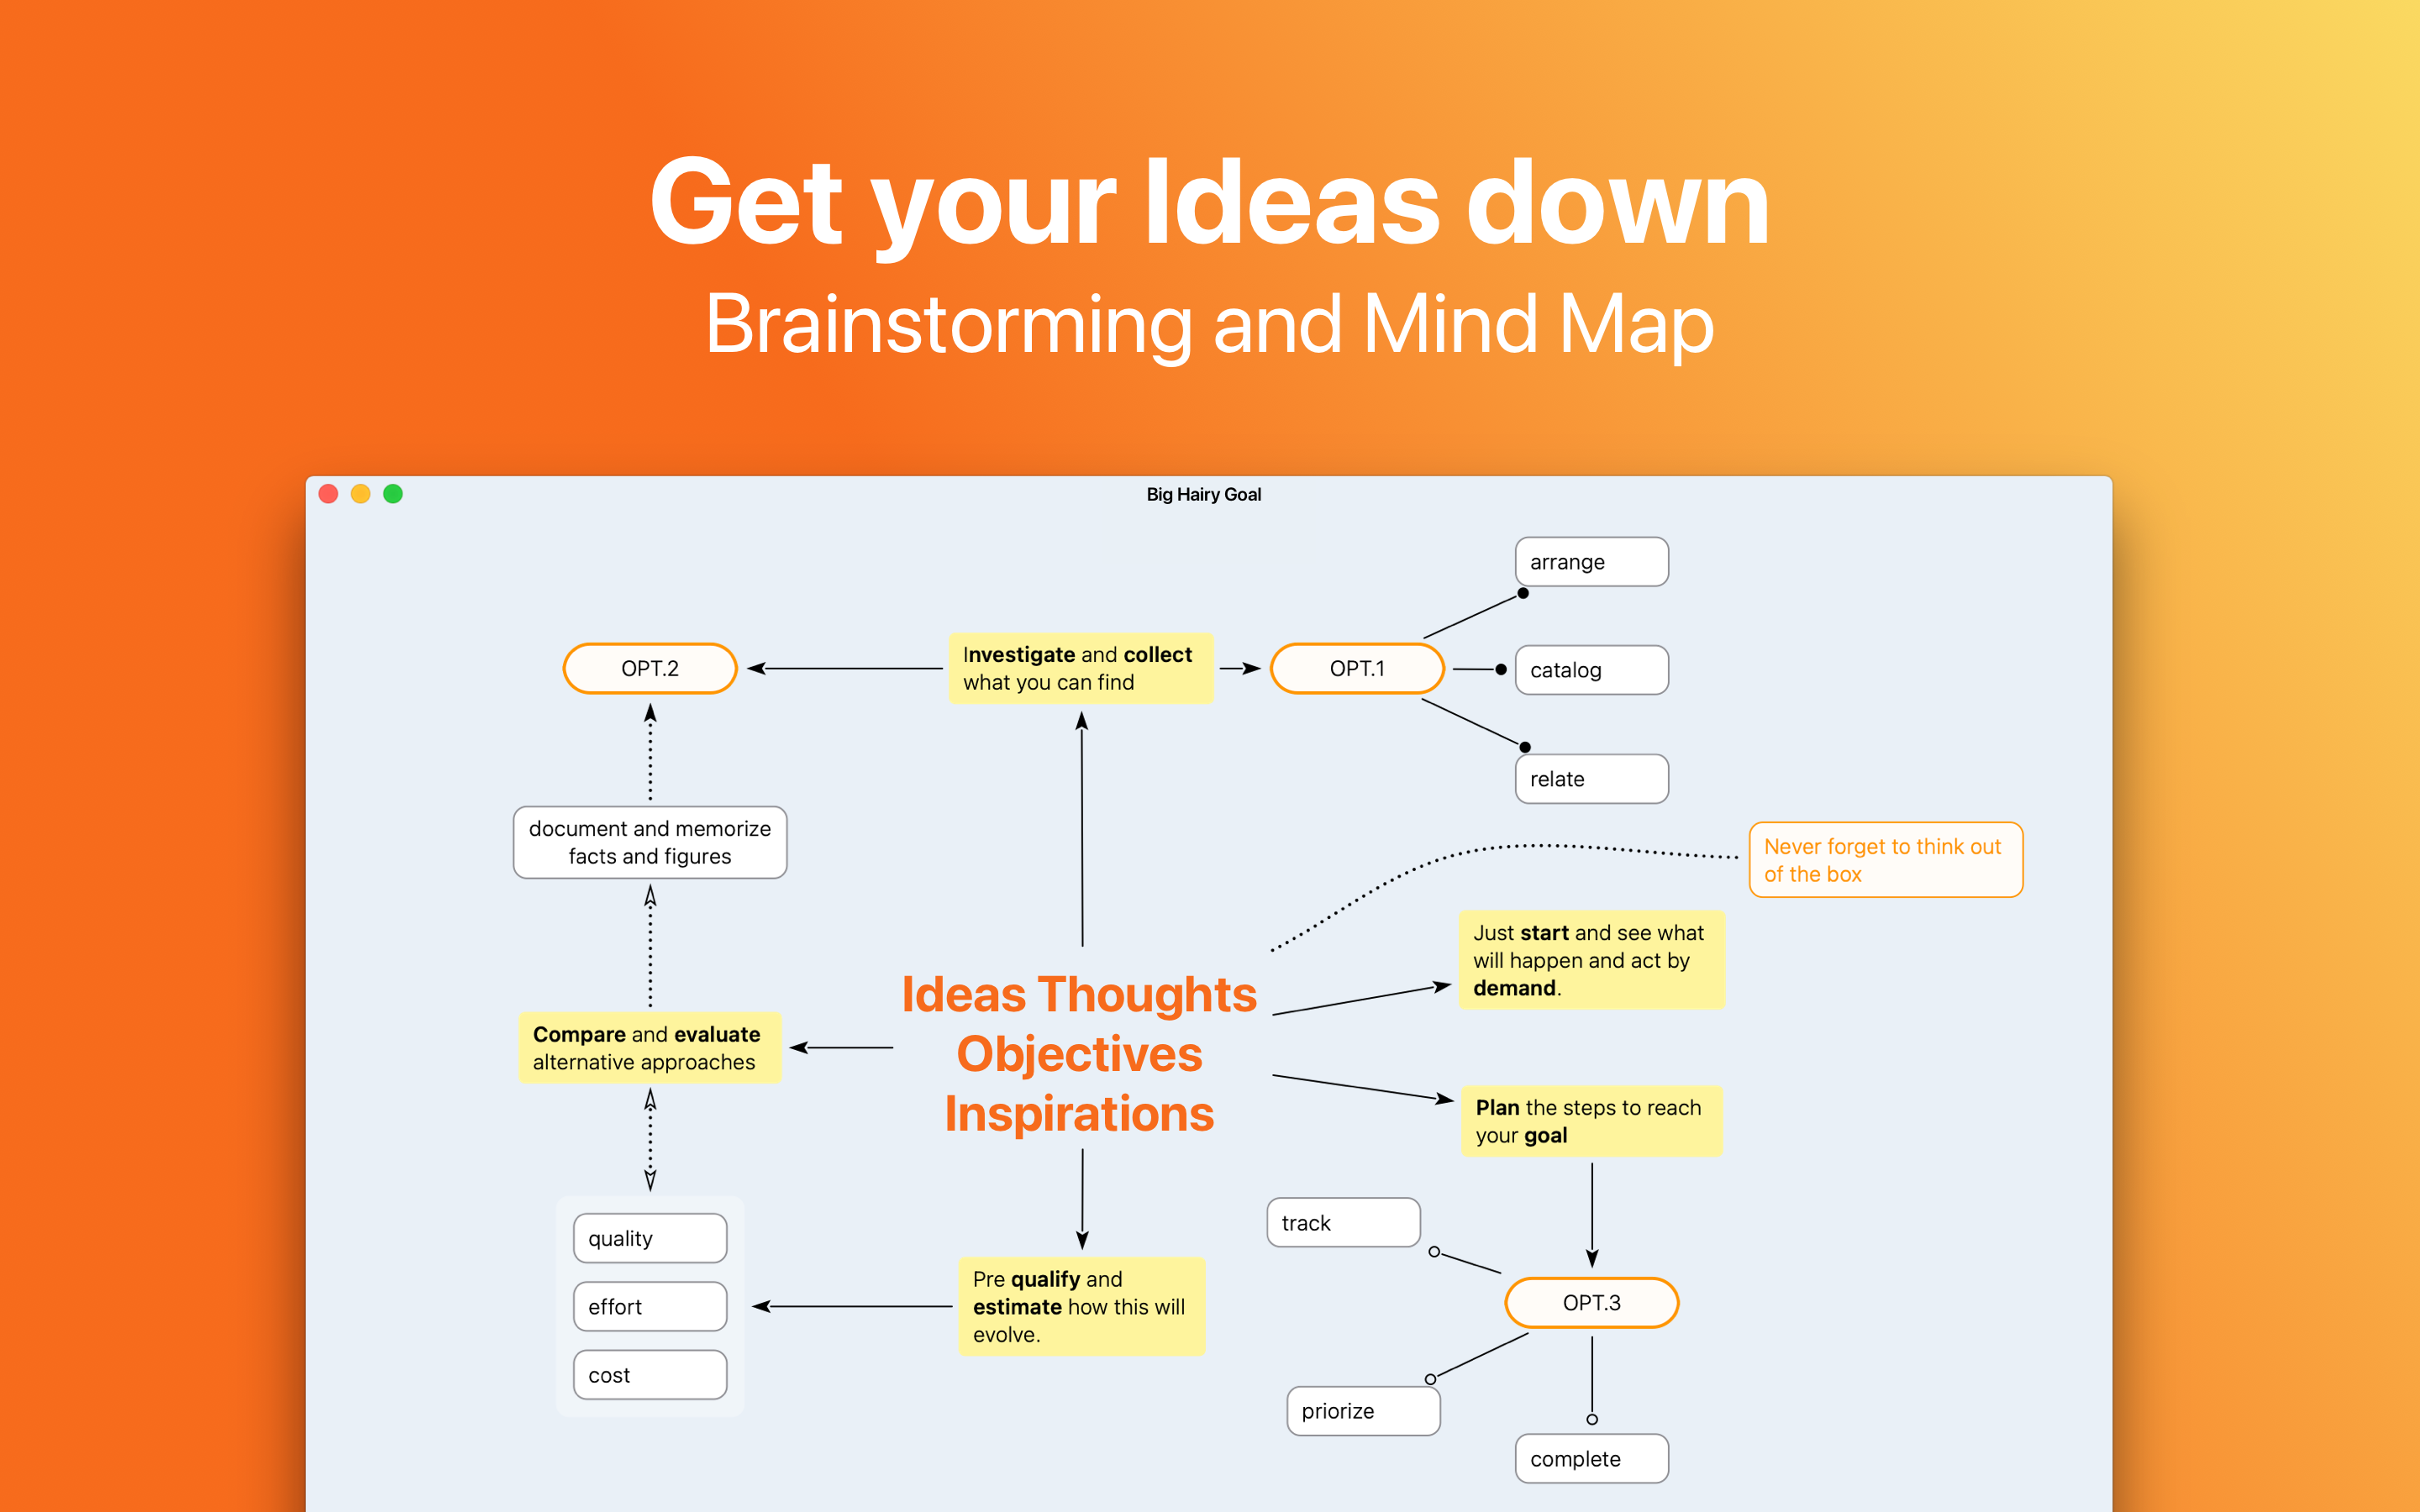 Big Hairy Goal Software - Brainstorming and Mind mapping